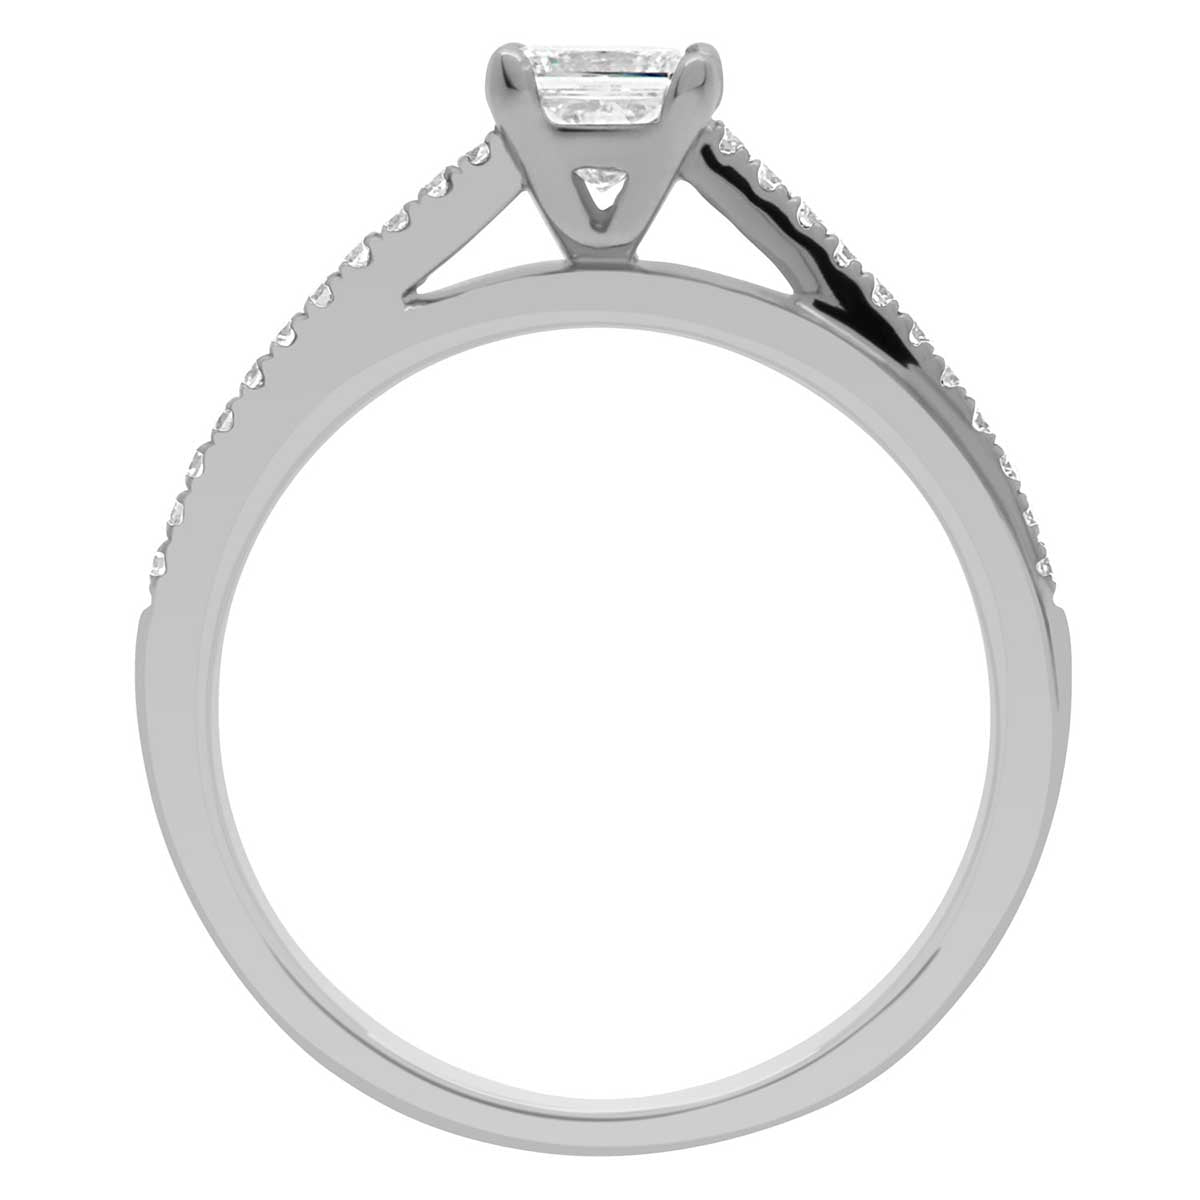 Promise Ring Style made from platinum and standing upright